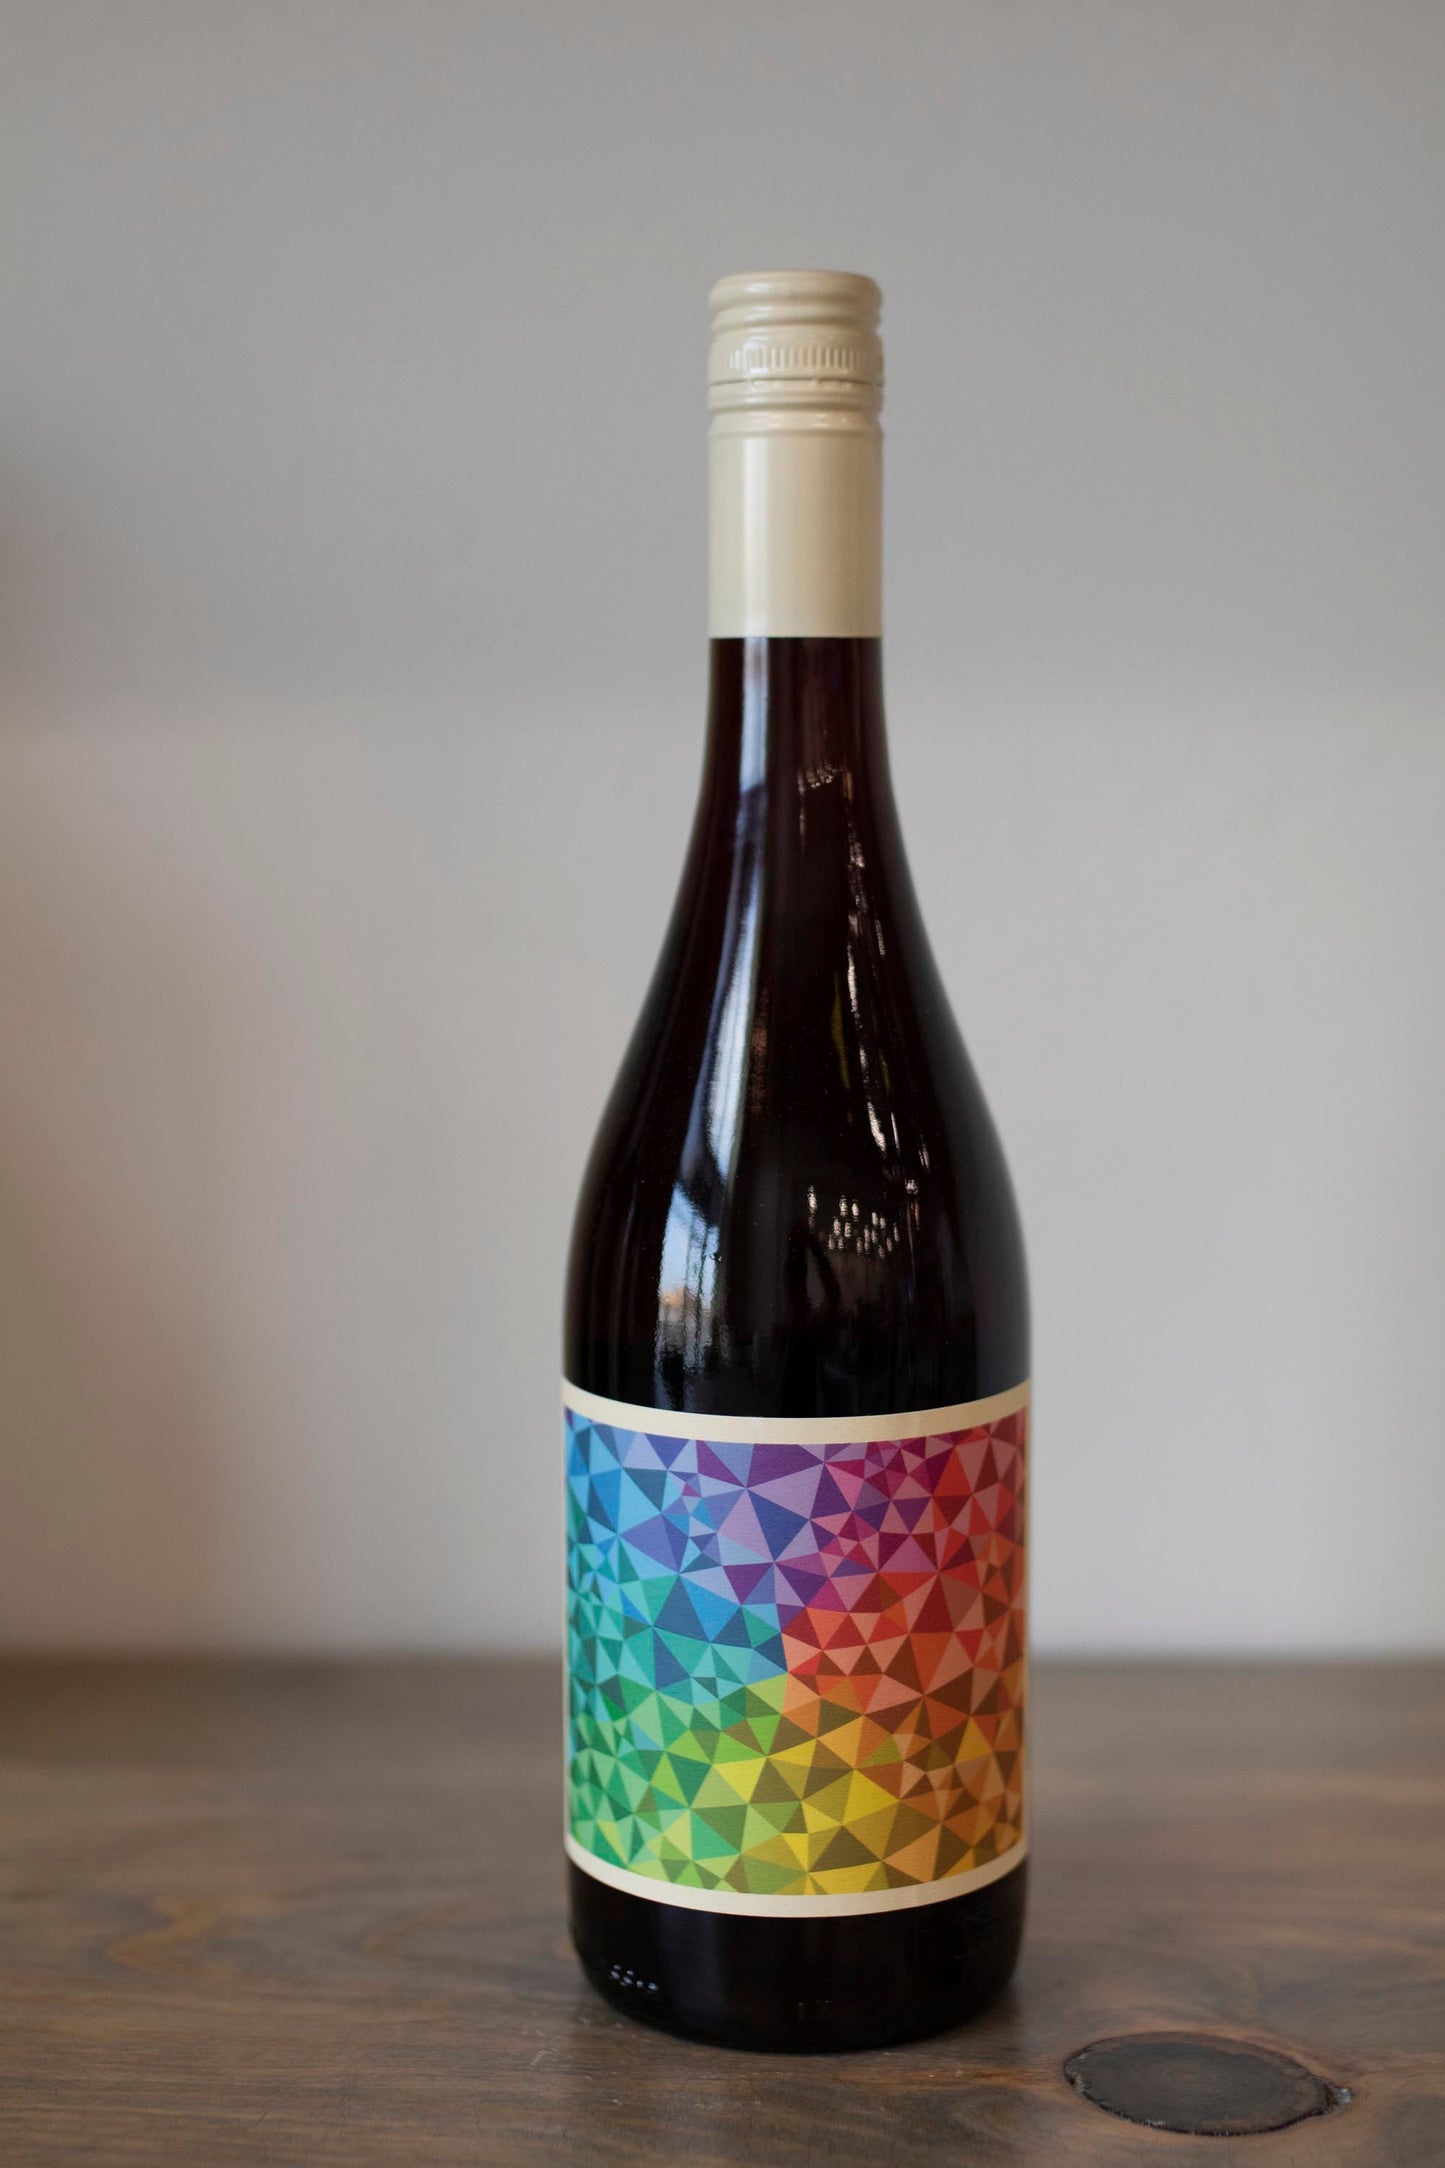 Bottle of Prisma Pinot Noir found at Vine & Board in 3809 NW 166th St Suite 1, Edmond, OK 73012